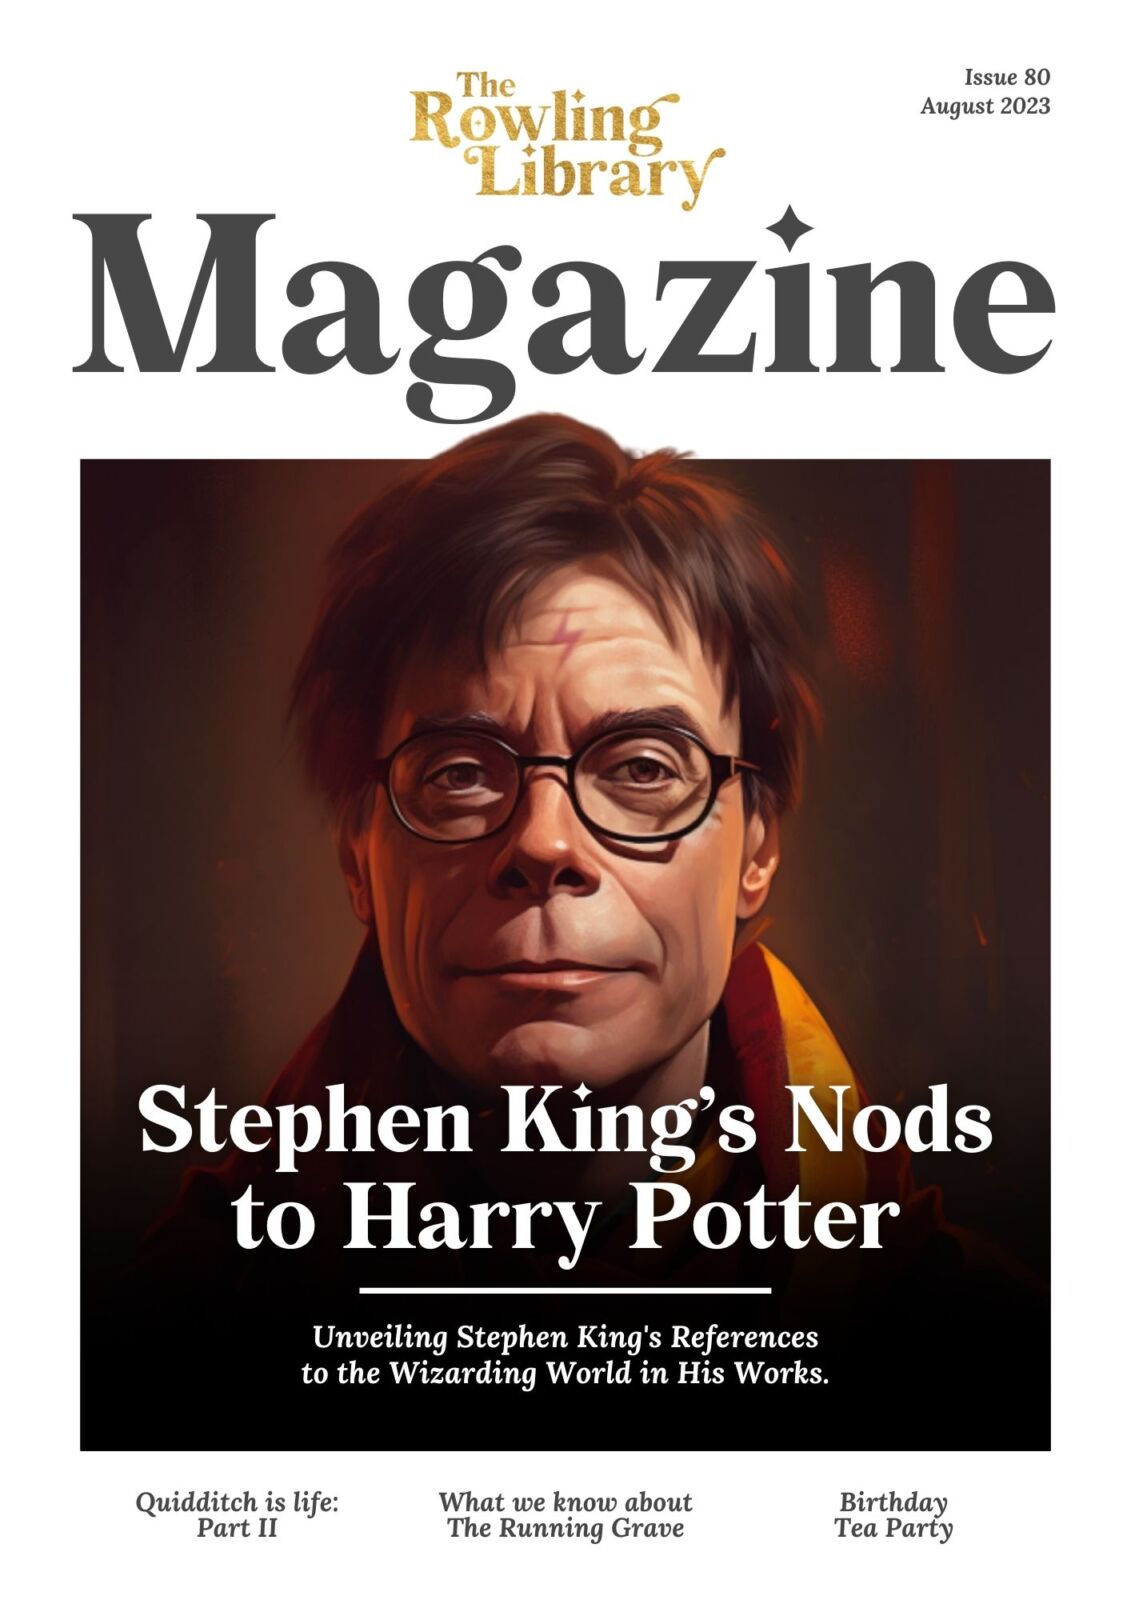 The Rowling Library Magazine #80 (August 2023): Stephen King's Nods to Harry Potter